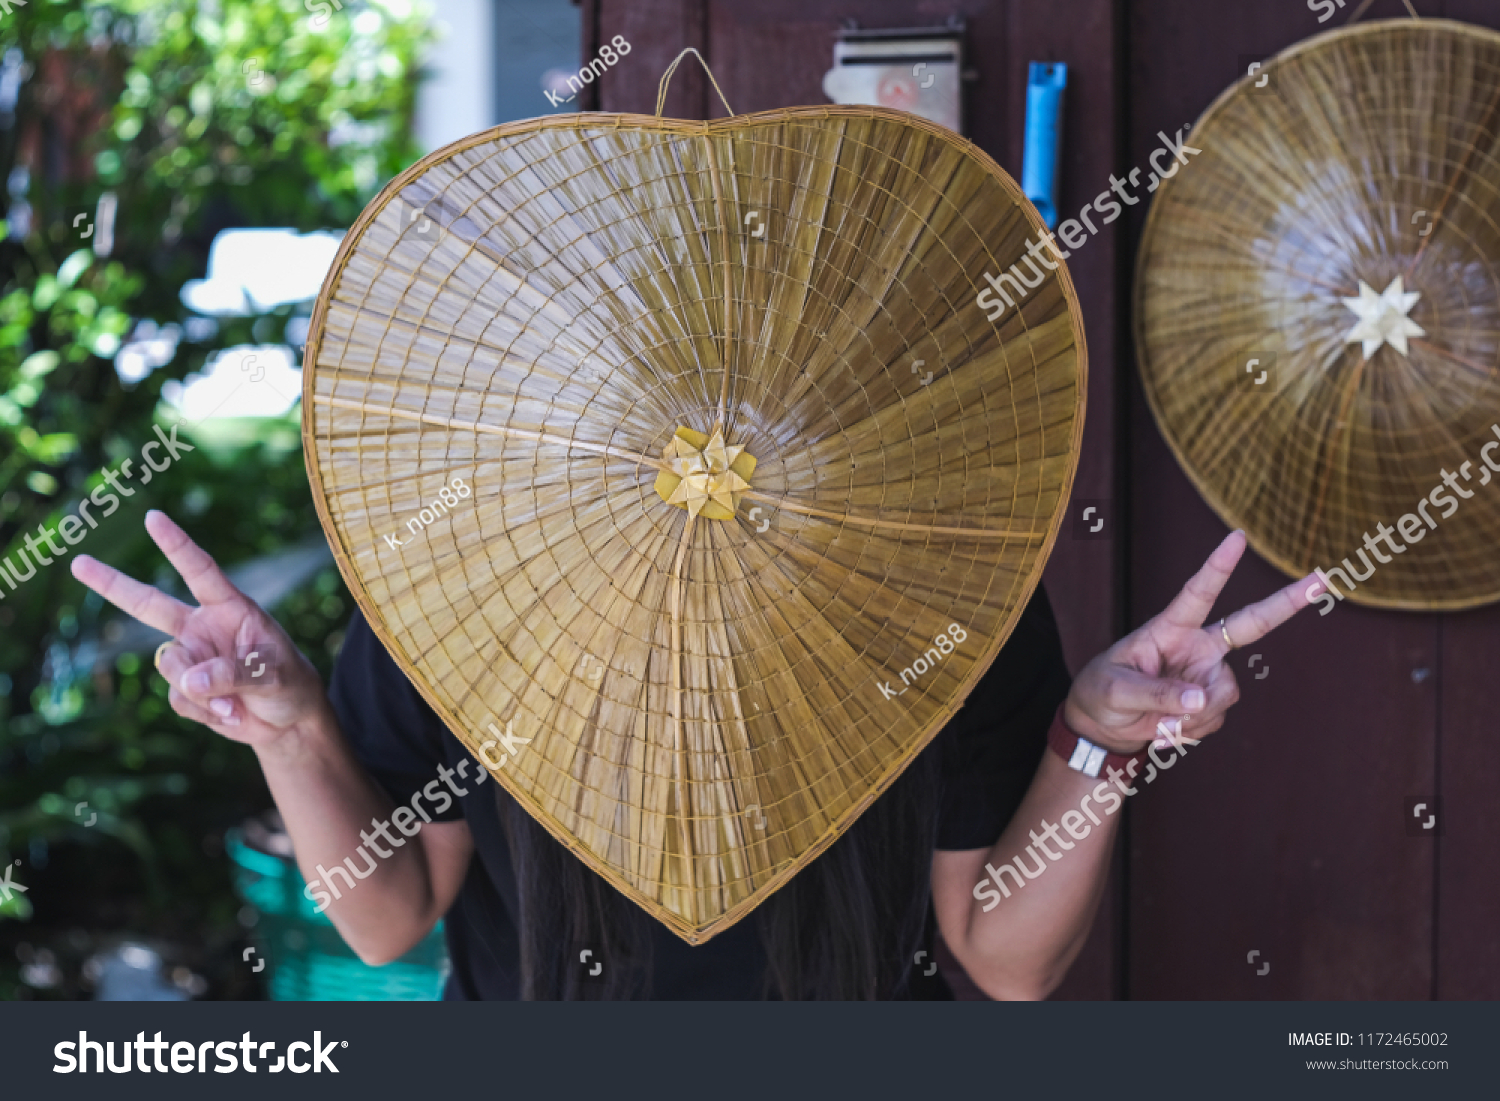 Heart shaped hat made from bamboo or palm leaf #1172465002